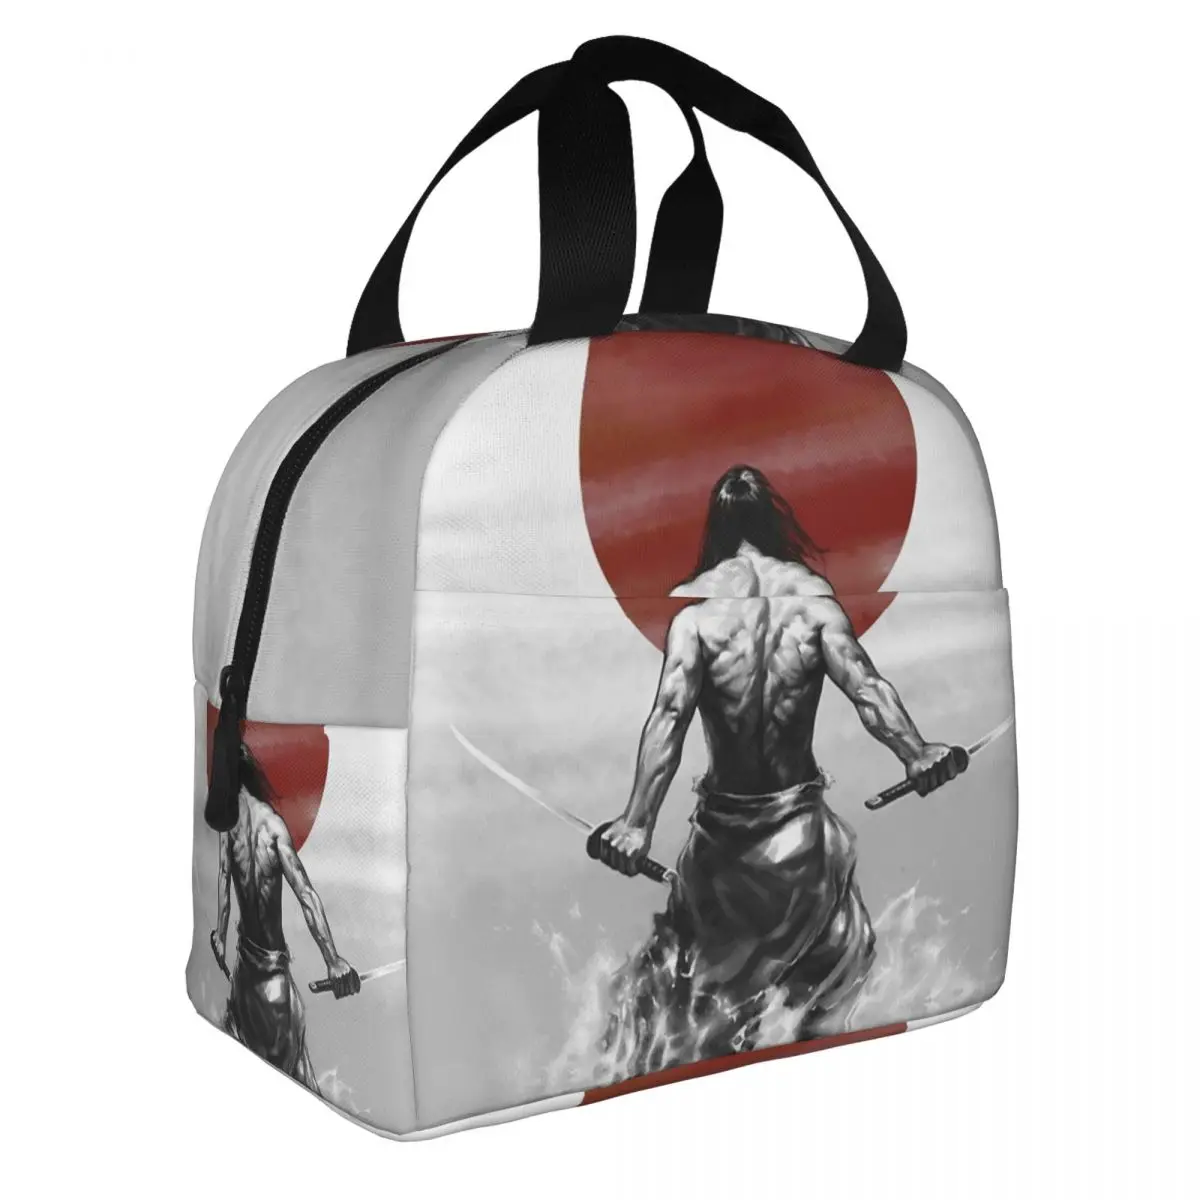 Fantasy - Samurai Lunch Bento Bags Portable Aluminum Foil thickened Thermal Cloth Lunch Bag for Women Men Boy